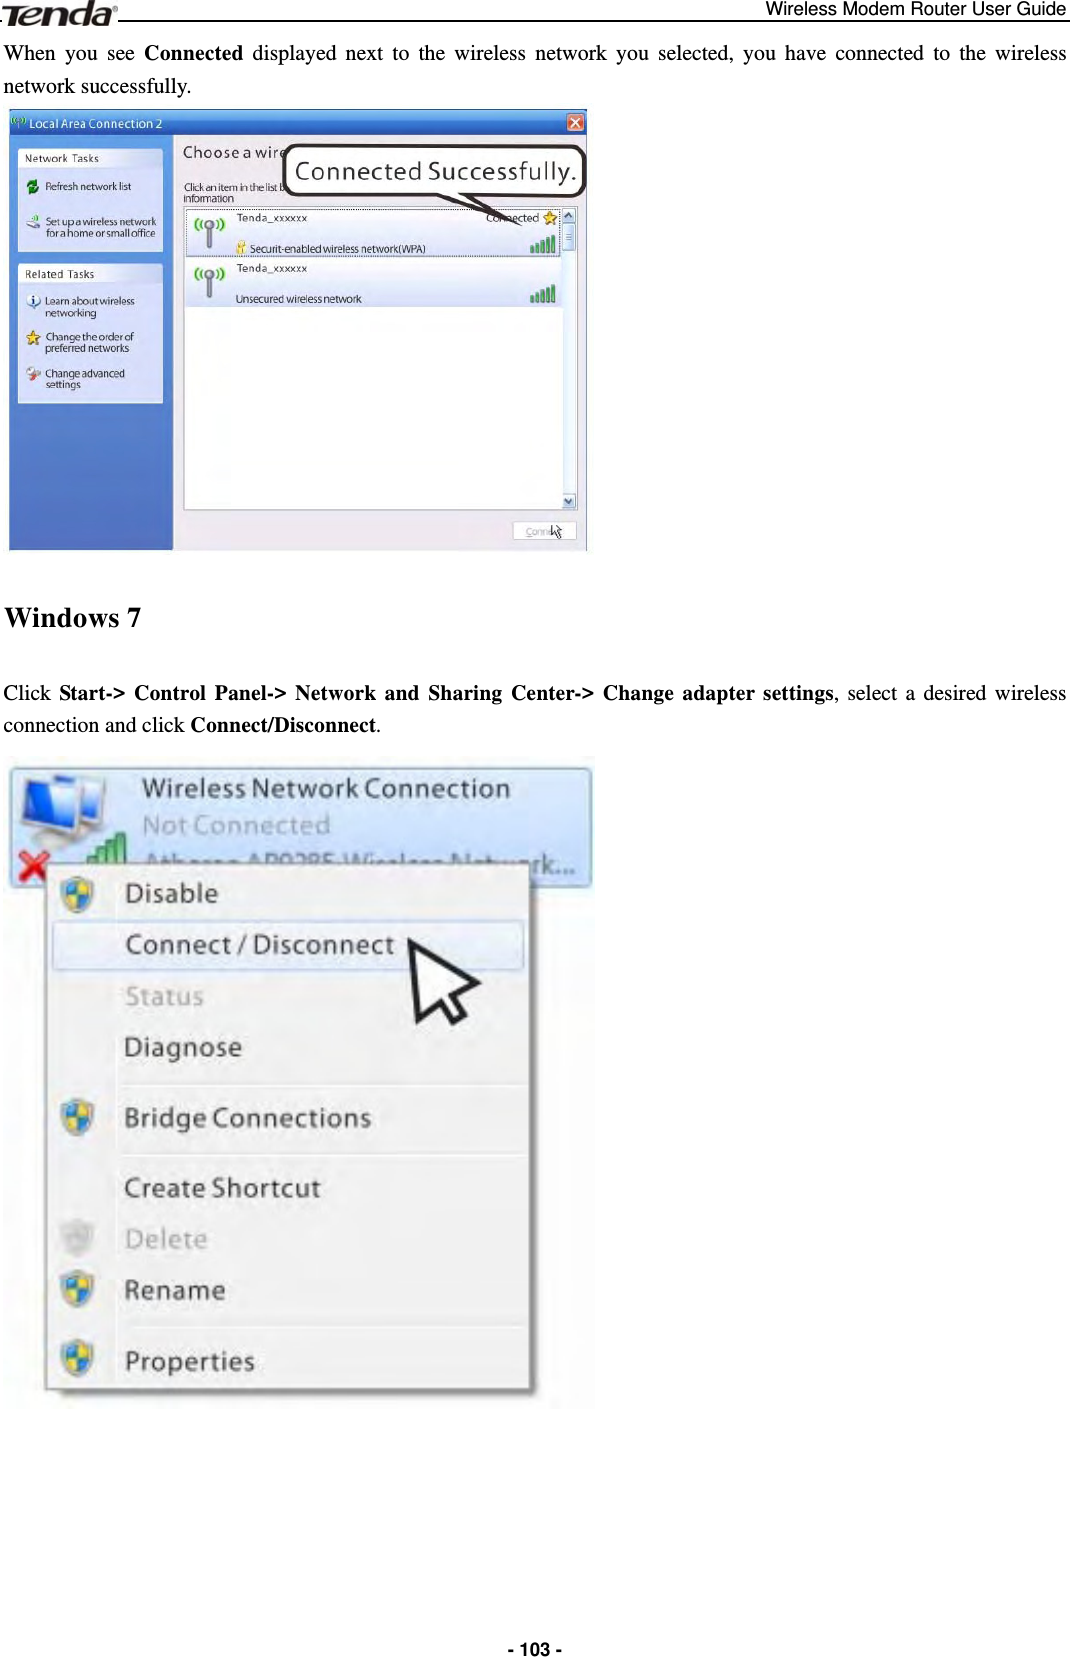 Wireless Modem Router User Guide  - 103 -When you see Connected displayed next to the wireless network you selected, you have connected to the wireless network successfully.  Windows 7 Click Start-&gt; Control Panel-&gt; Network and Sharing Center-&gt; Change adapter settings, select a desired wireless connection and click Connect/Disconnect.  